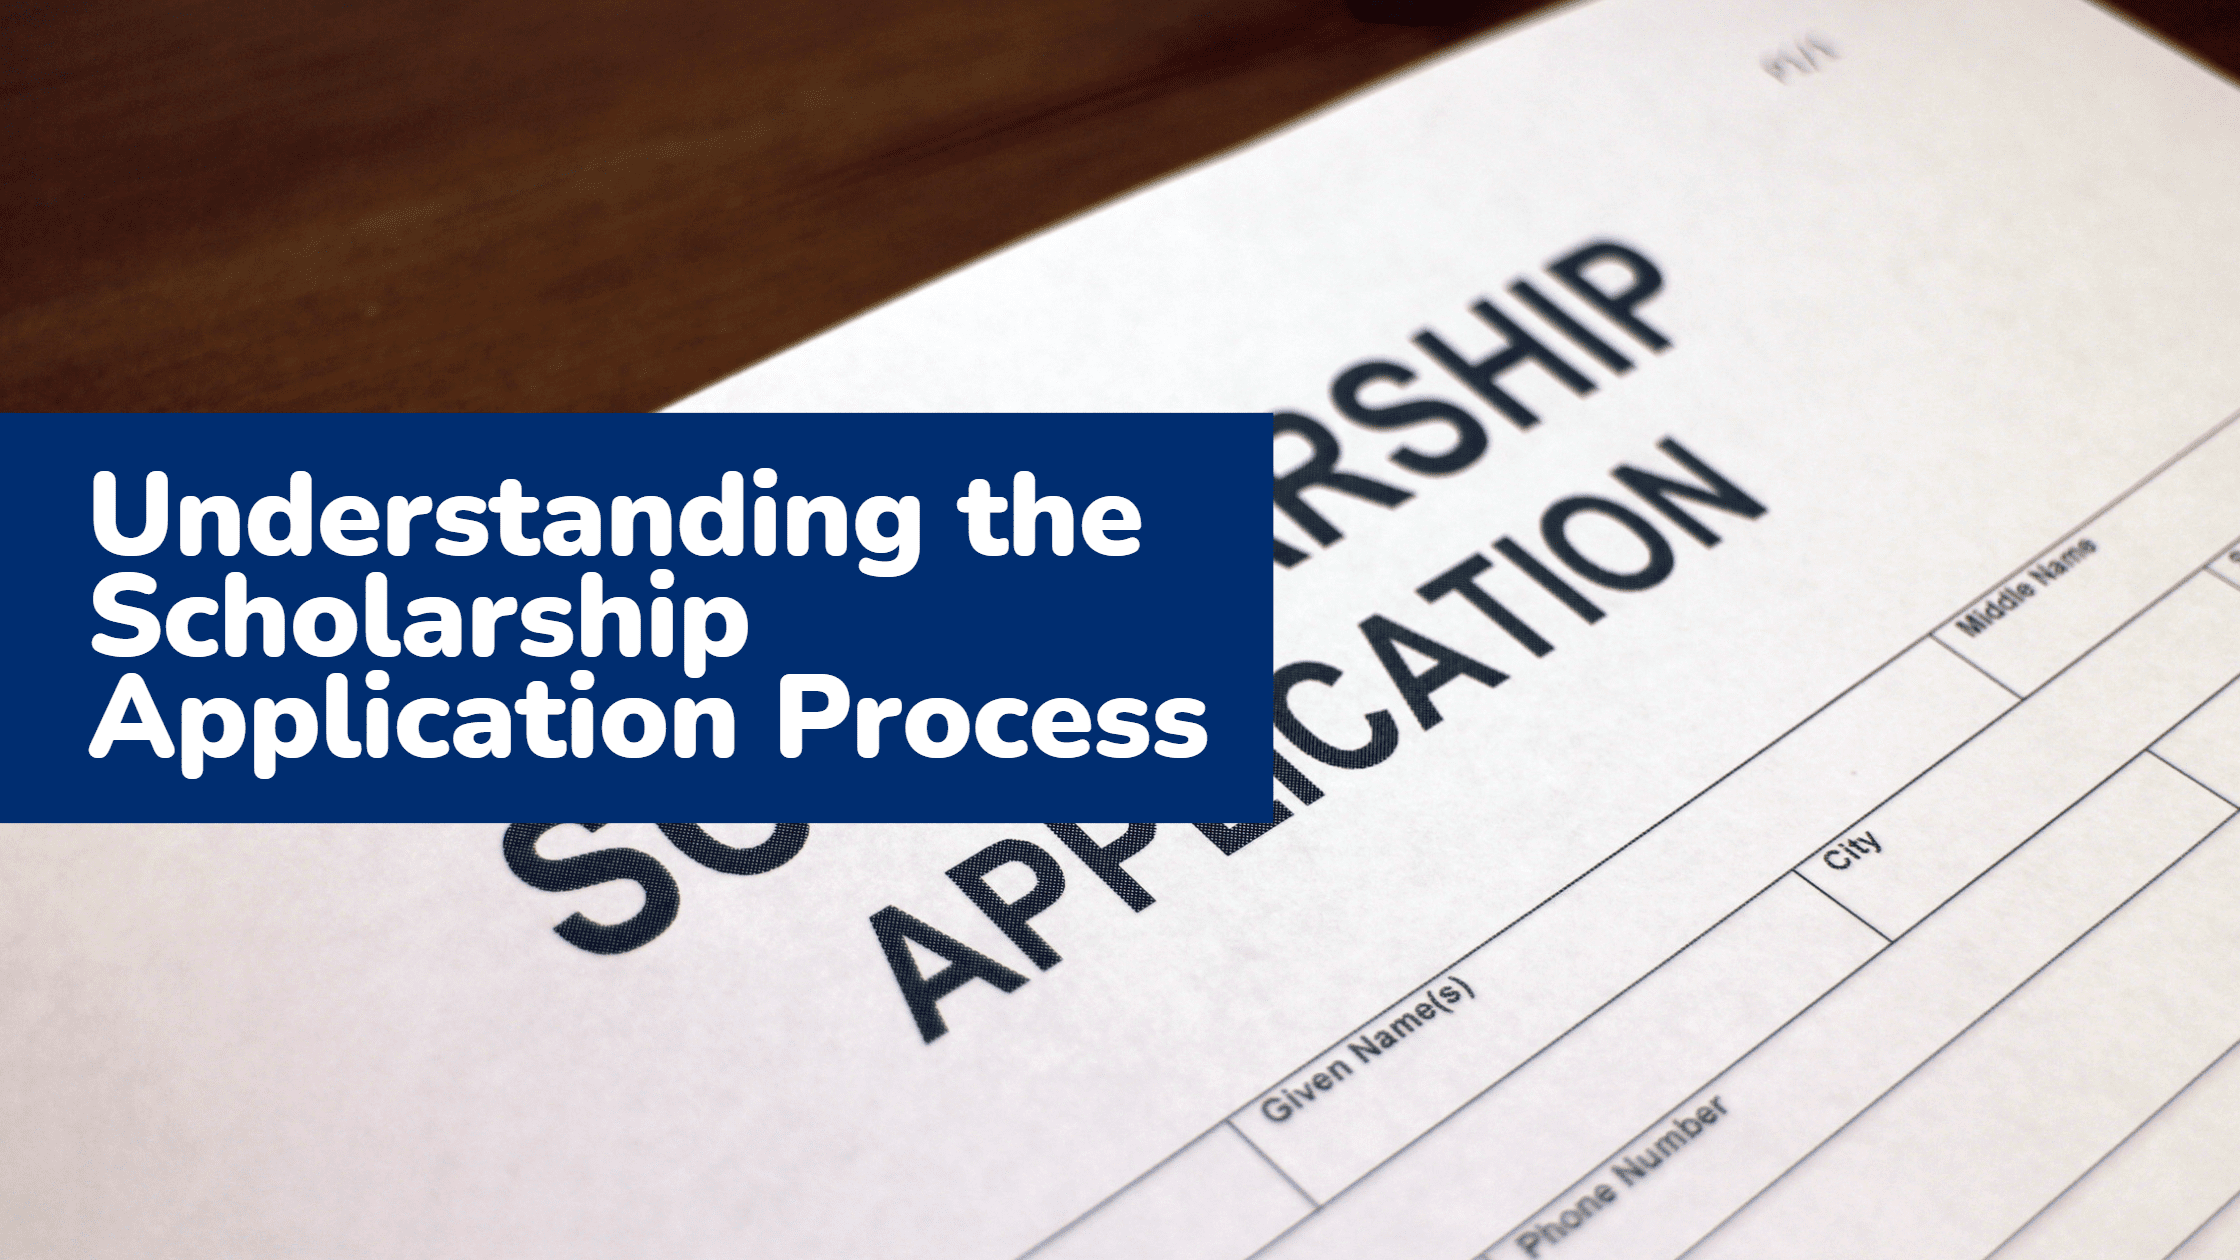 Understand the scholarship application process on estudent360.com: Learn steps, documentation, and strategies for successful applications